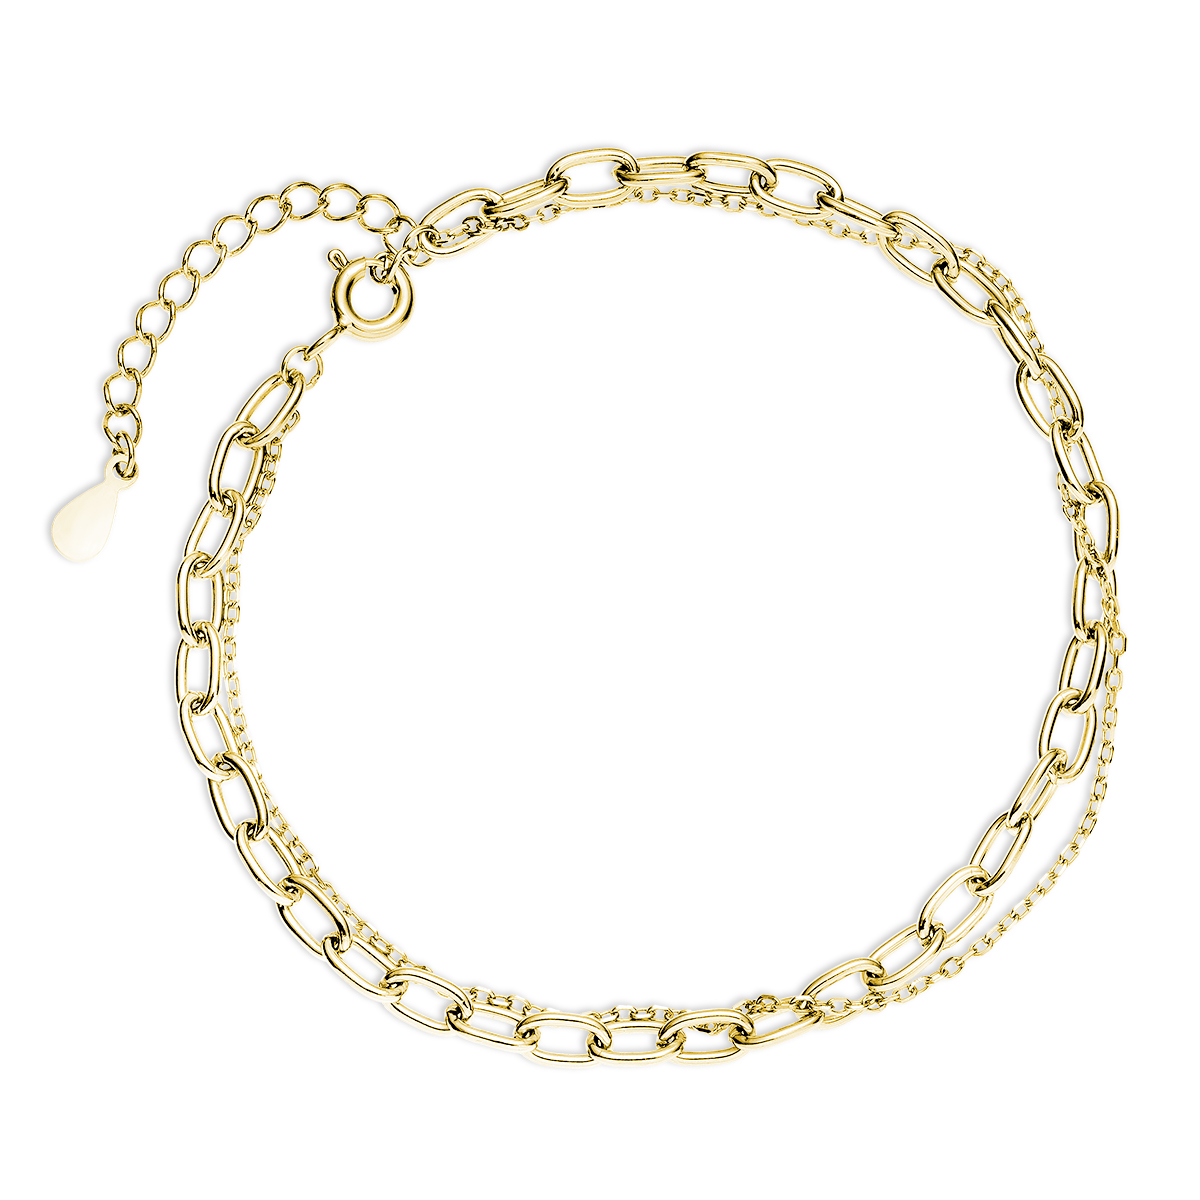 Link and Chain Bracelet–Gold Plated Βραχιόλι Link and Chain Κίτρινο Επιχρυσωμένο Ασήμι 925 - ασήμι 925